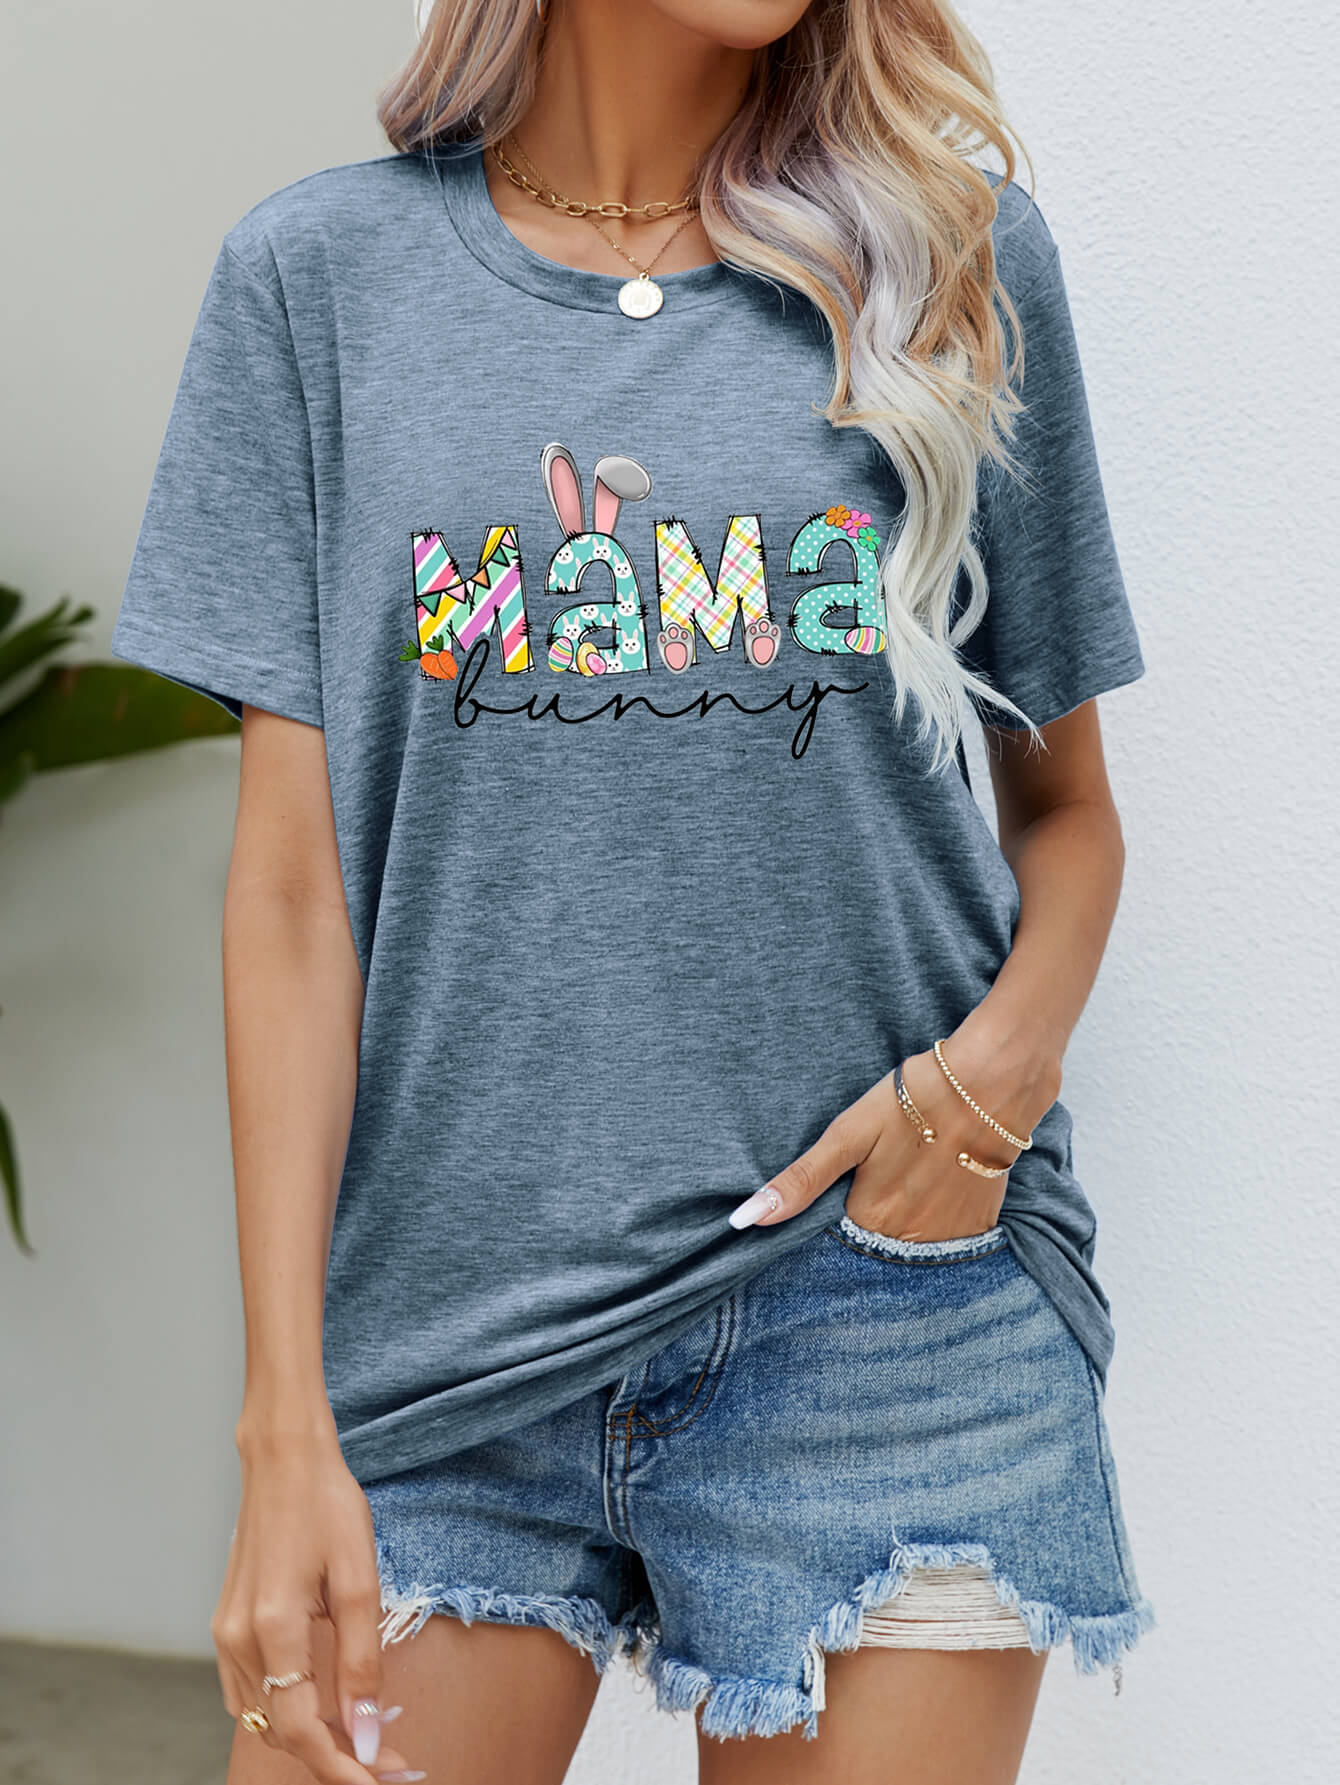 MAMA BUNNY Easter Graphic Tee (6 Colors)  Krazy Heart Designs Boutique Misty  Blue S 